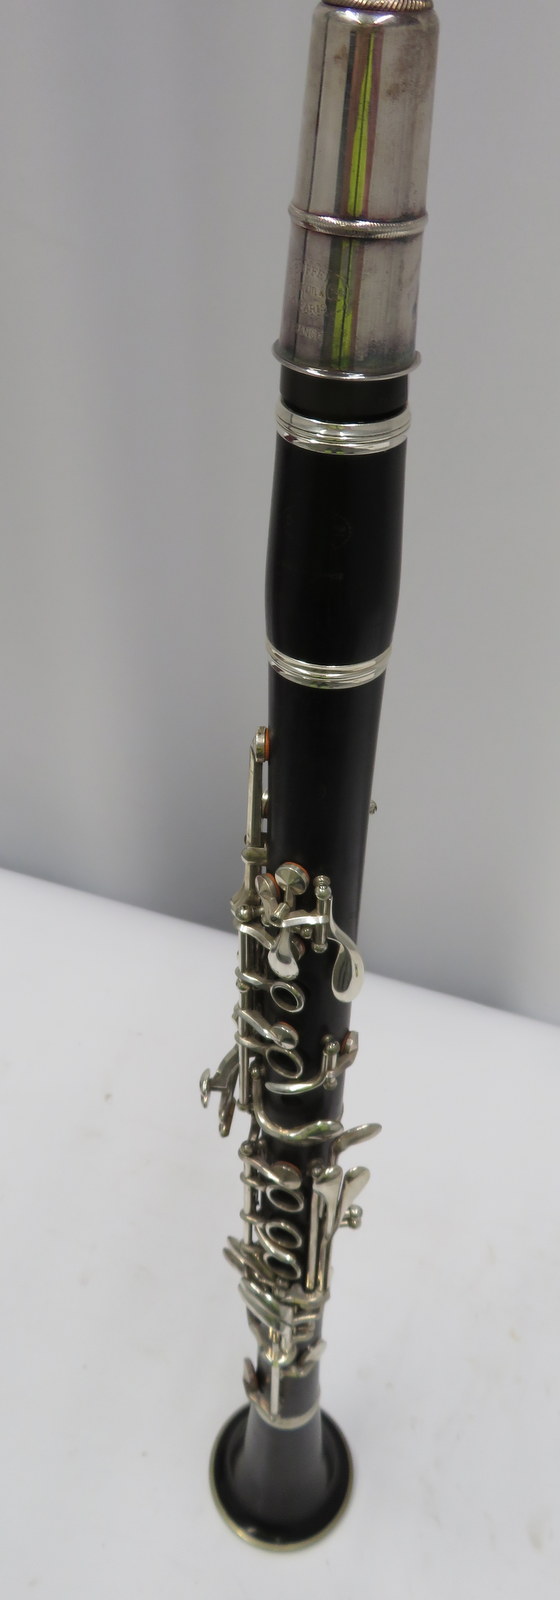 Buffet Crampon R13 clarinet with case. Serial number: 437527. - Image 4 of 21